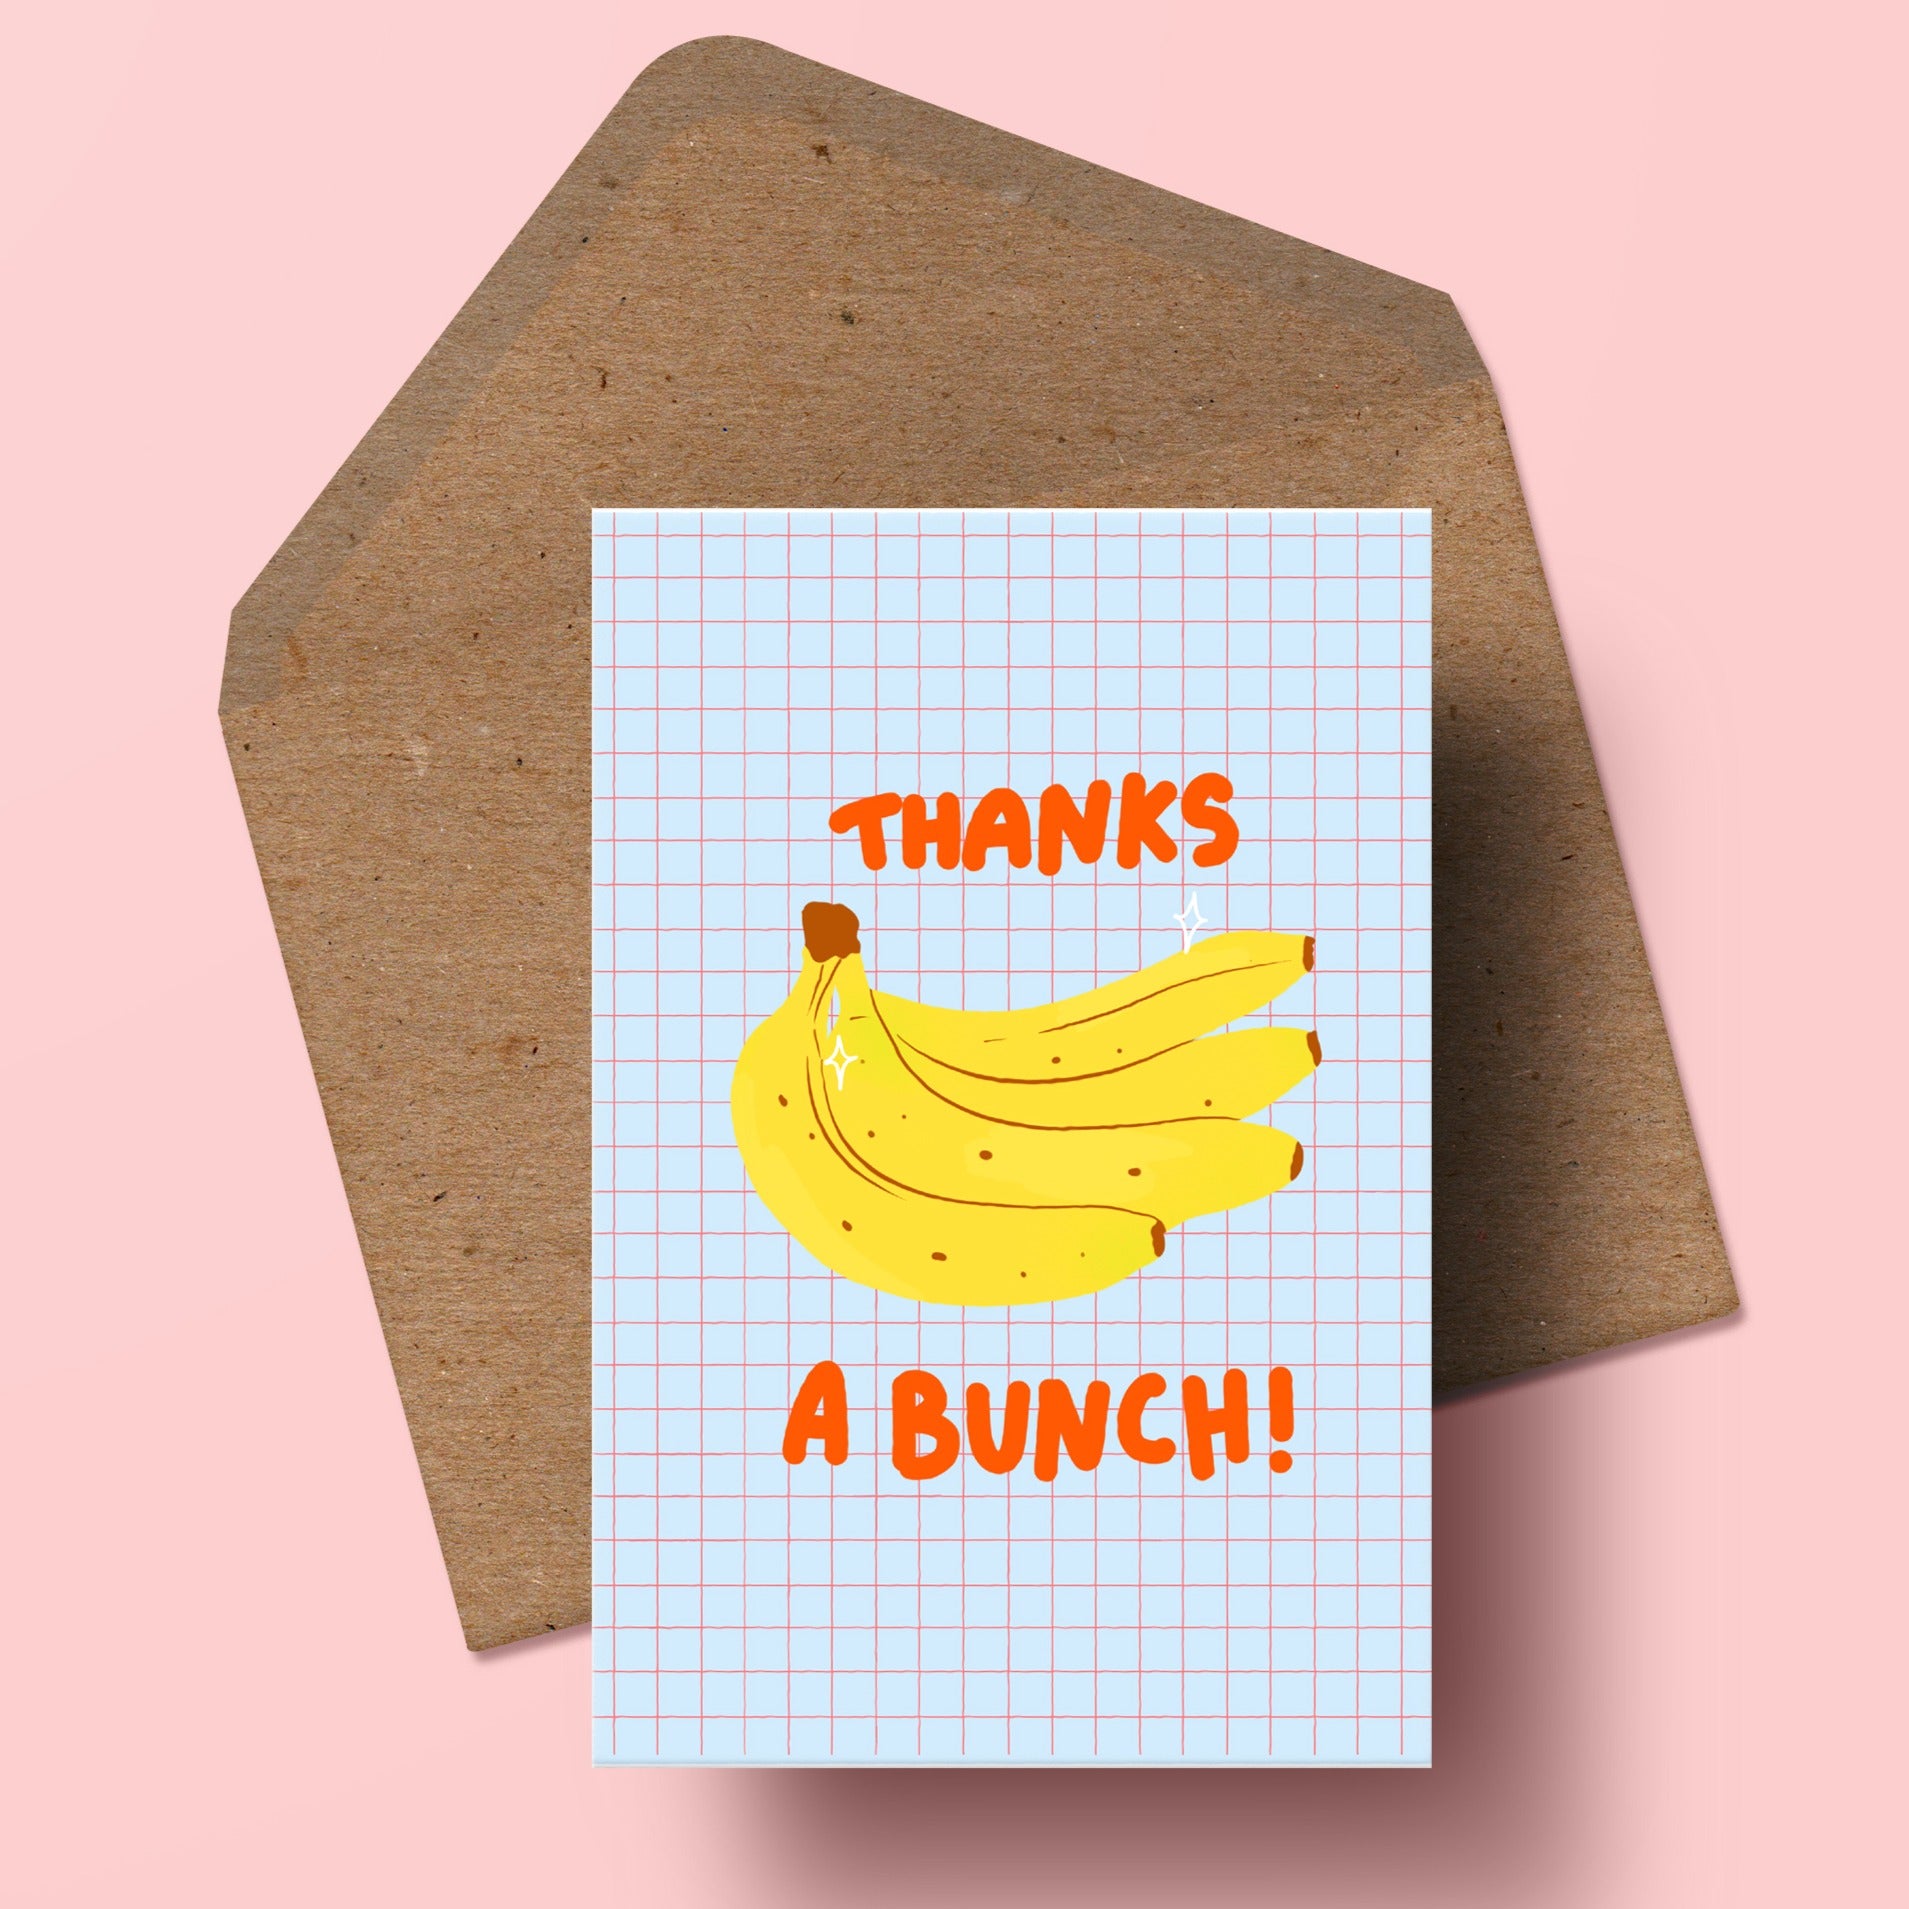 image of a greetings card featuring an illustration of a bunch of bananas with the word thanks above it and a bunch below it. the background of the card is a pale blue with a red check pattern. beneath the card is a recycled kraft envelope.